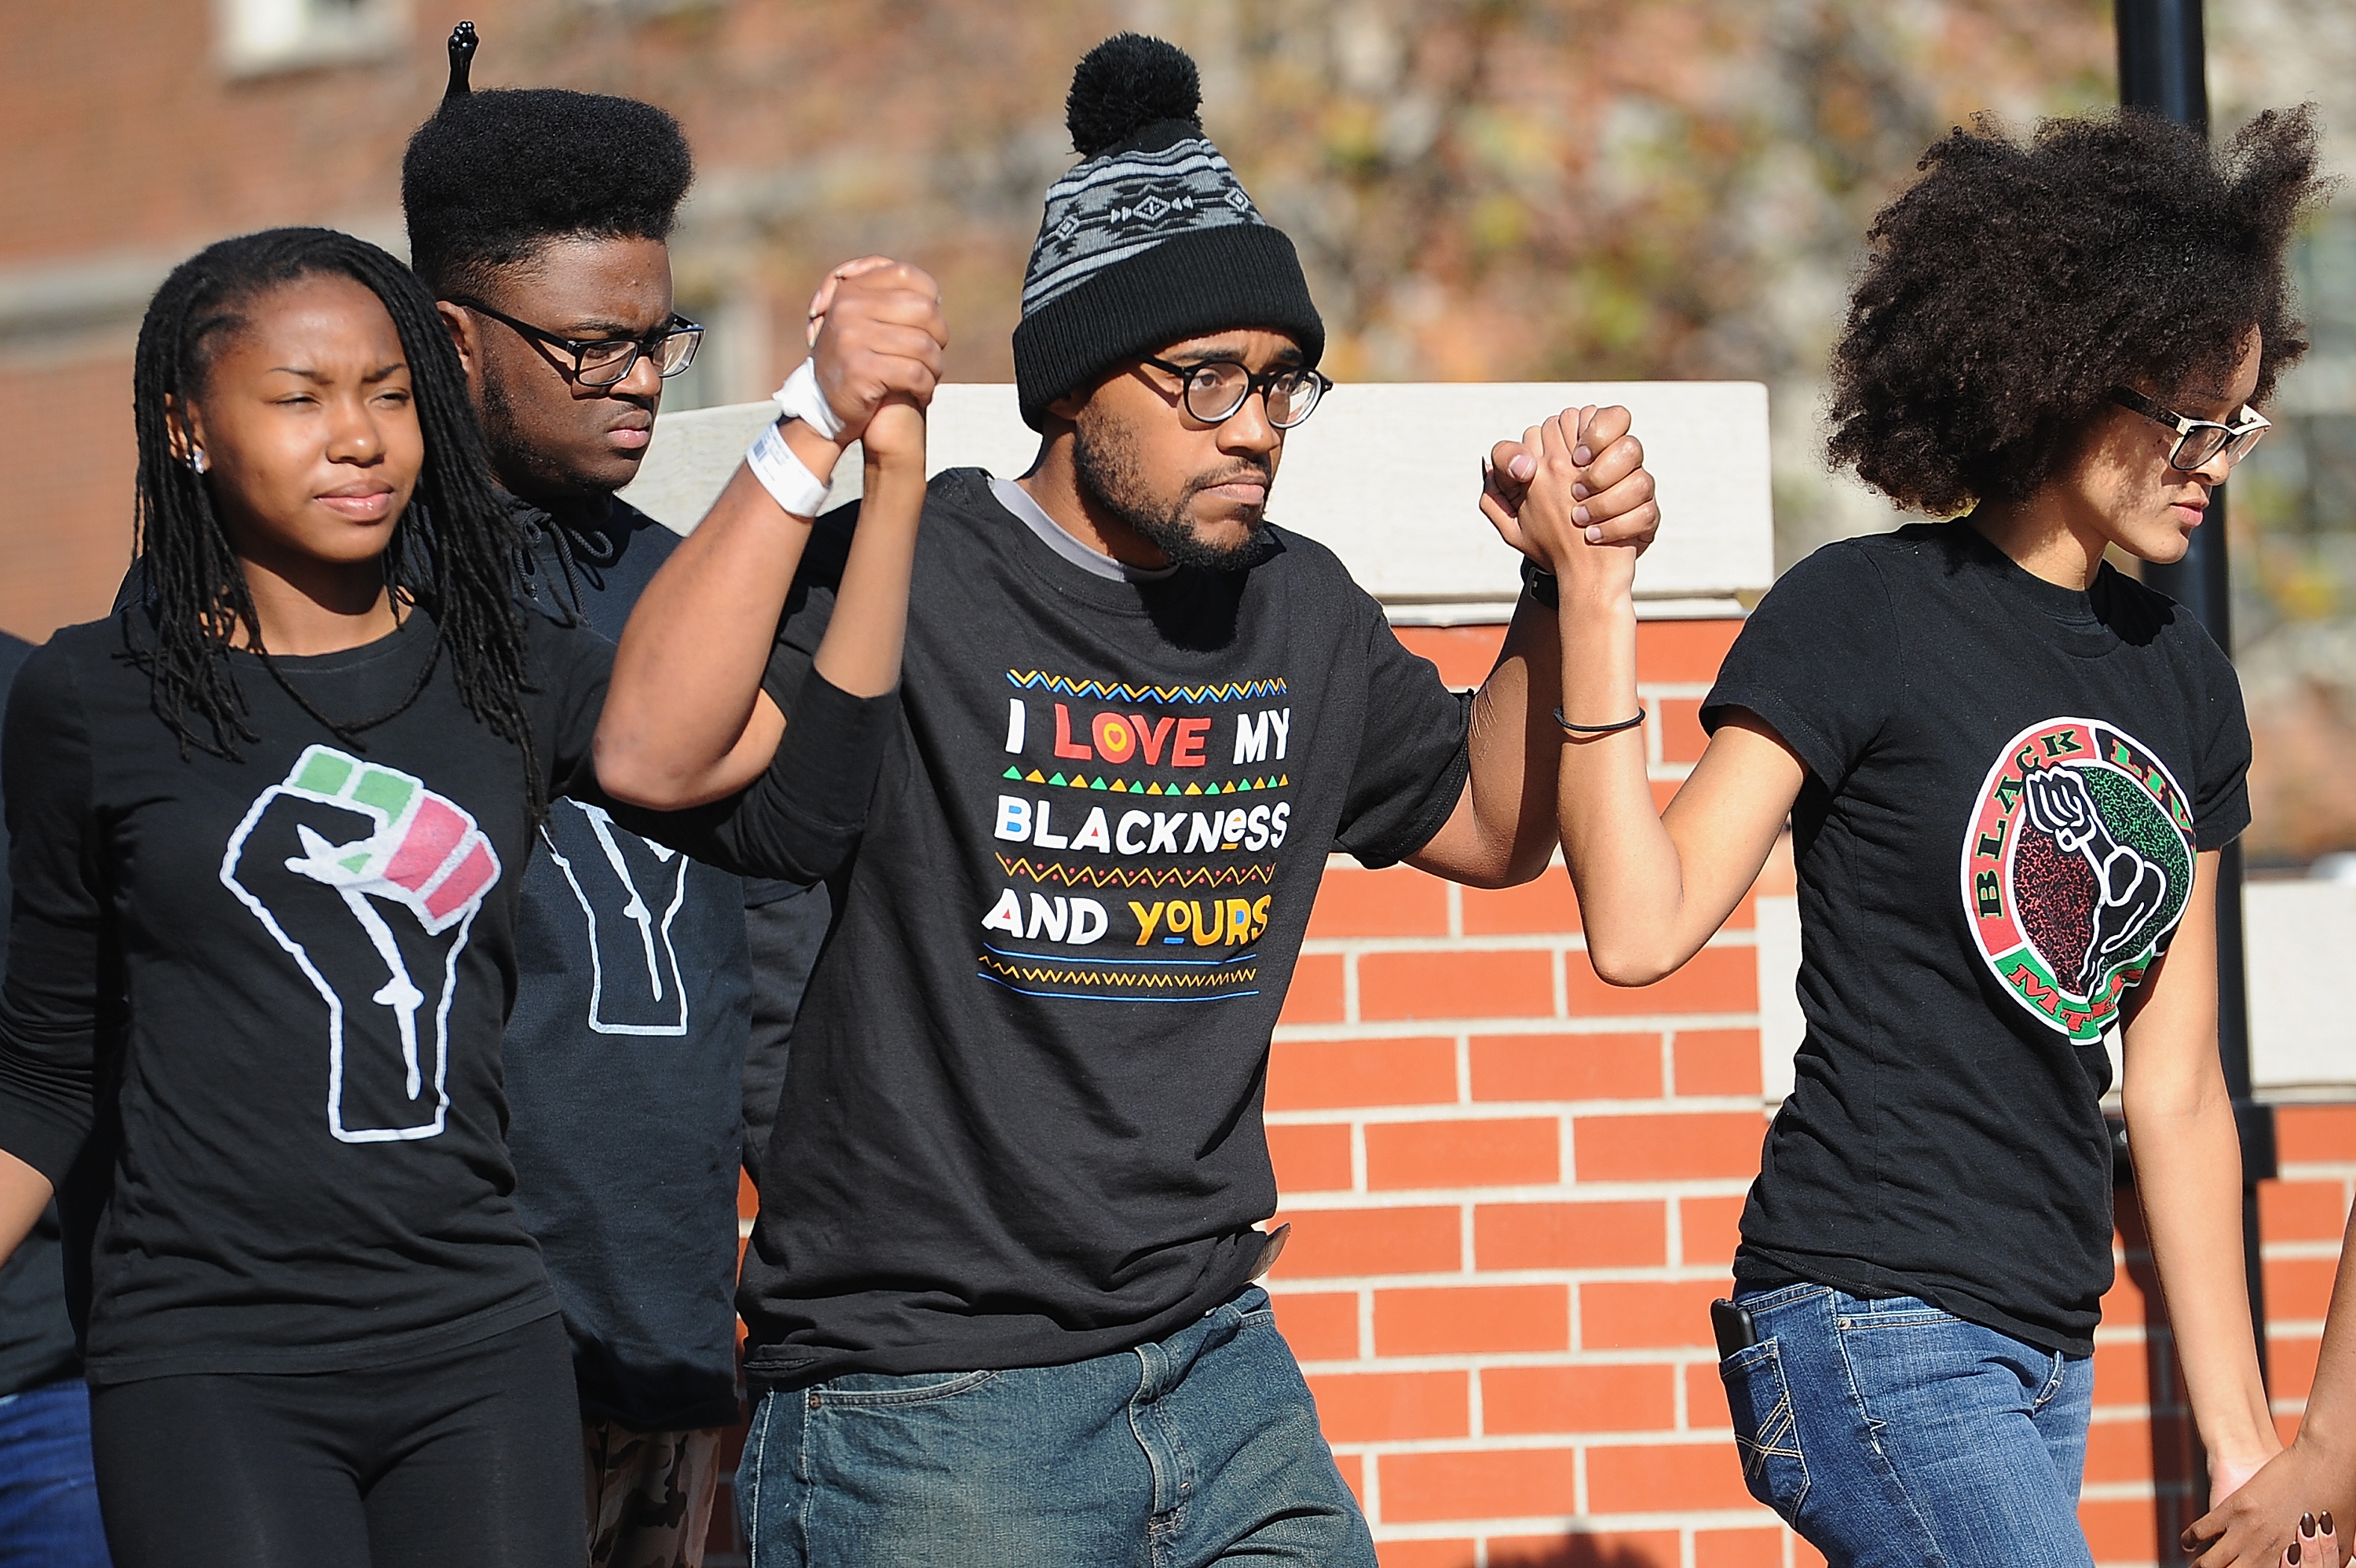 Jonathan Butler, a University of Missouri grad student who did a 7 day hunger strike is greeted by the crowd of students on the campus of University of Missouri - Columbia on November 9, 2015 in Columbia, Missouri. Students celebrate the resignation of University of Missouri System President Tim Wolfe amid allegations of racism. (Photo by Michael B. Thomas/Getty Images)